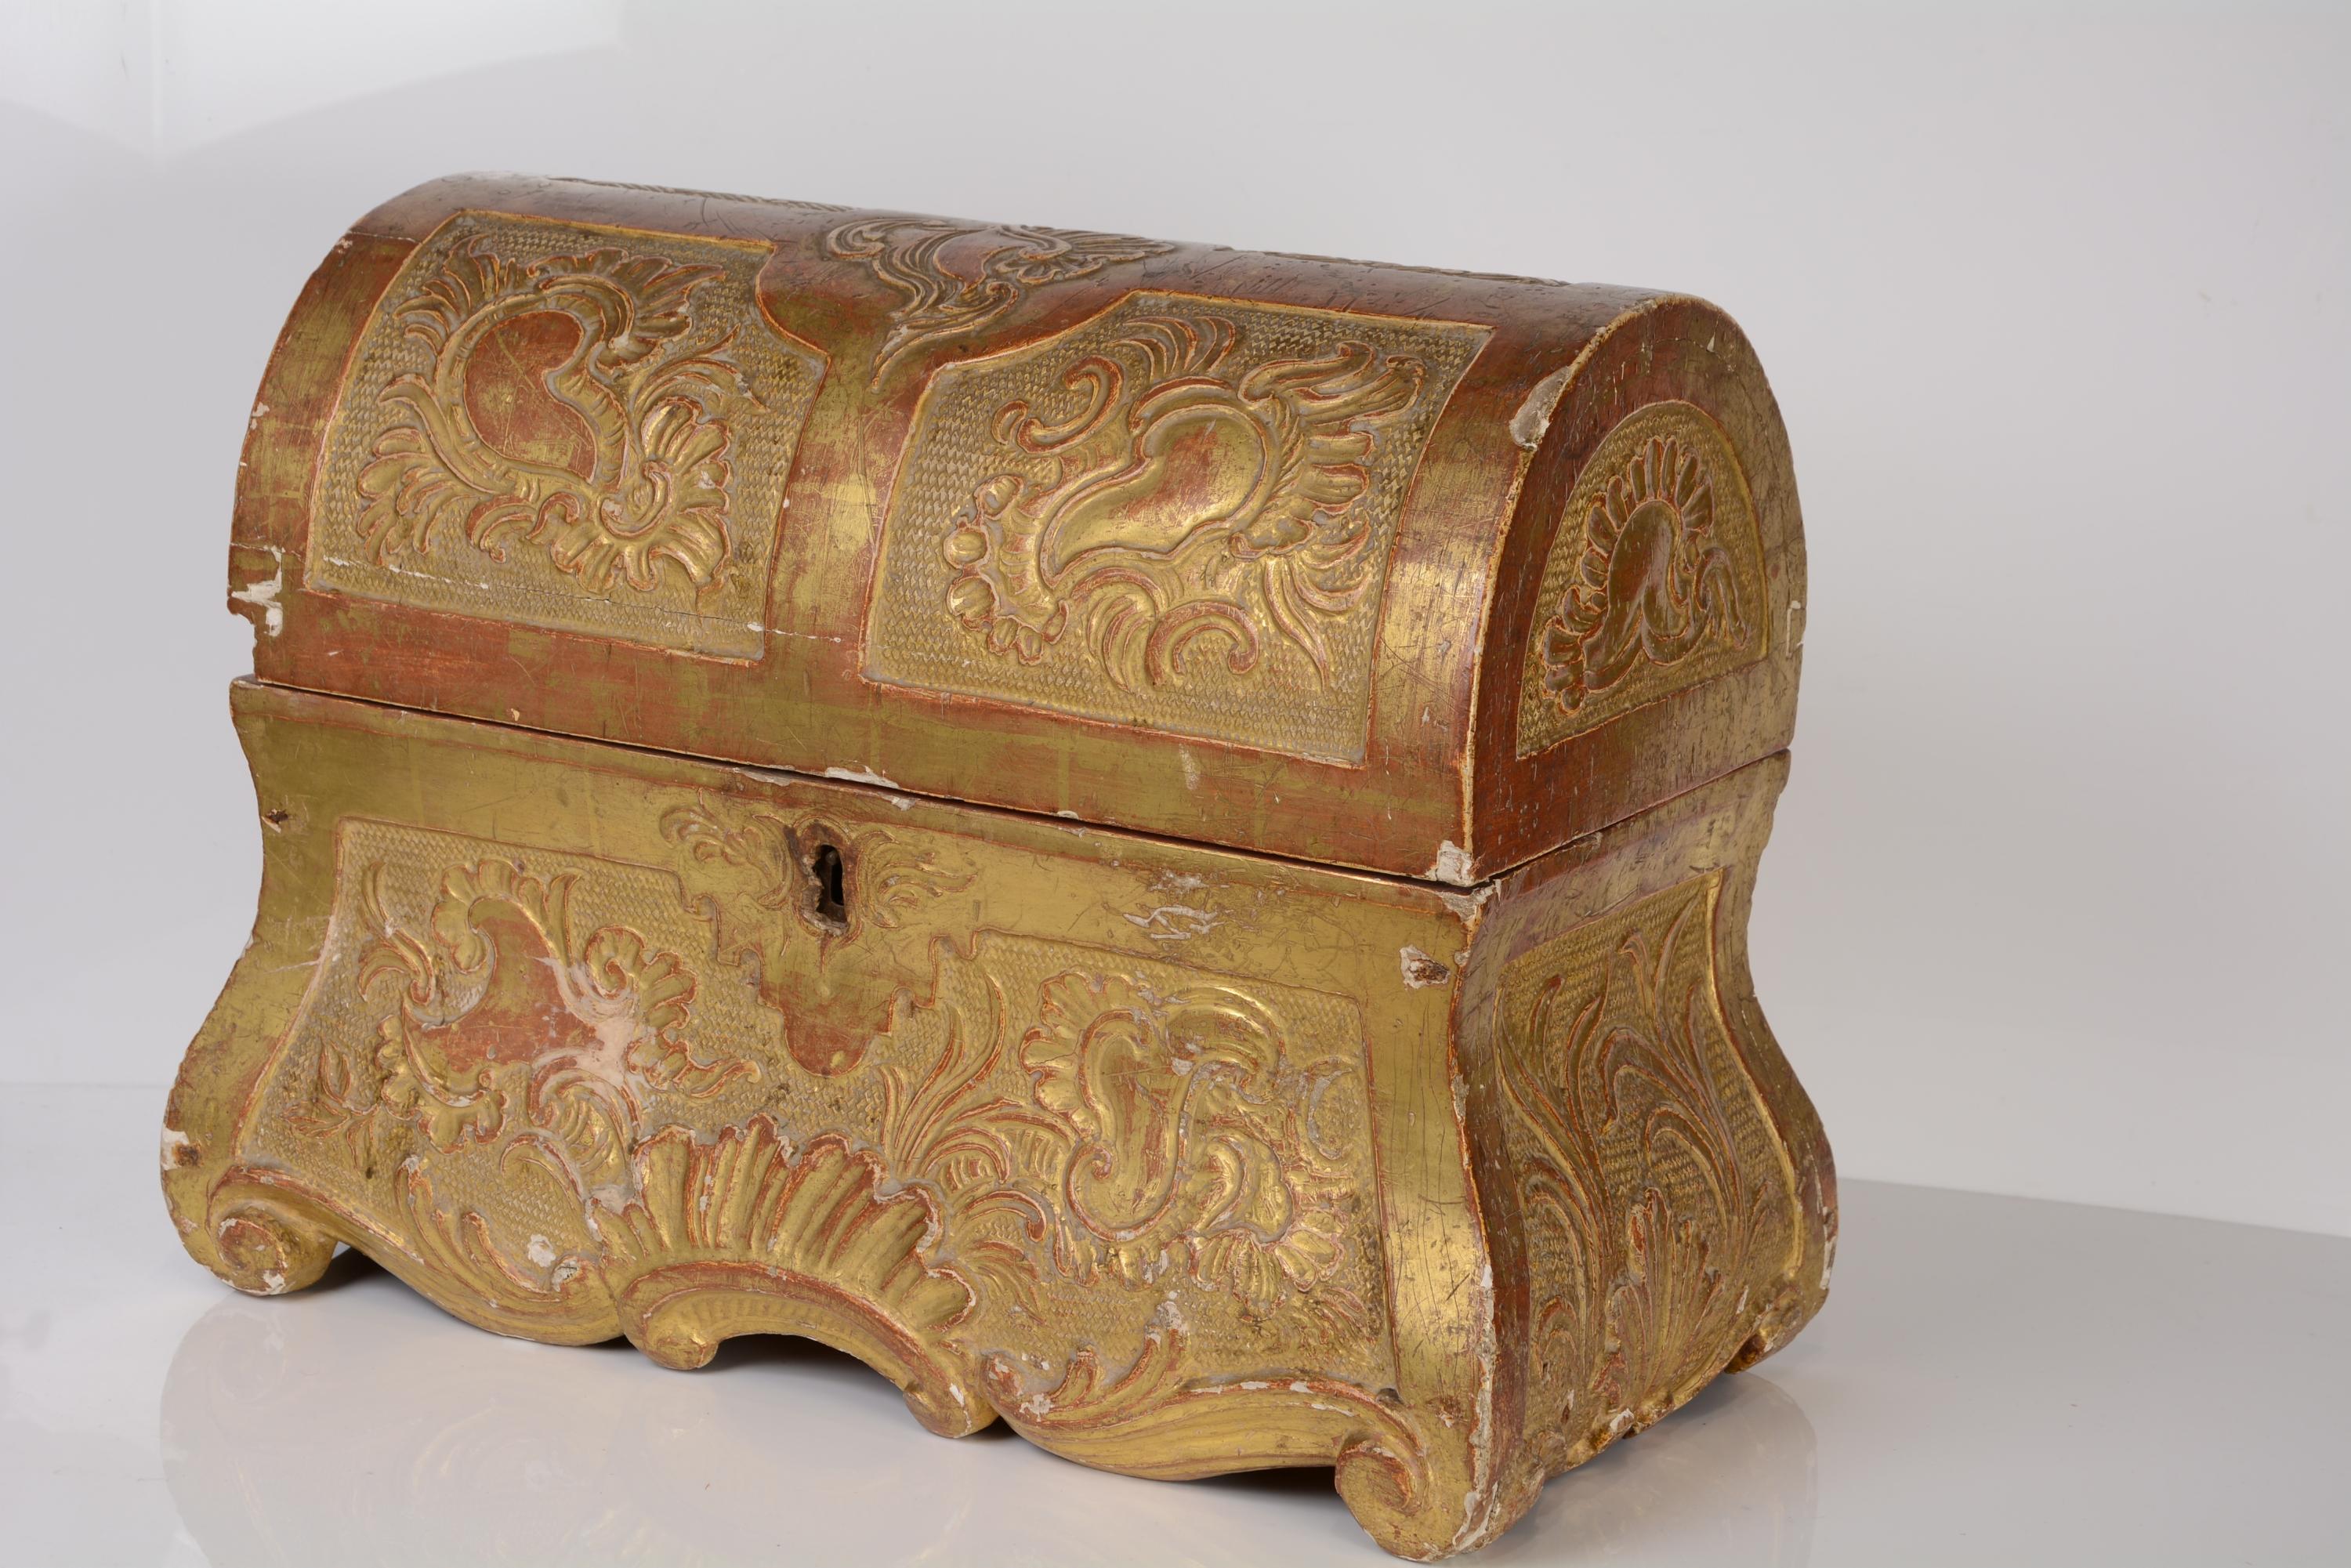 European Carved Golden Rococo Wood Chest, 18th Century For Sale